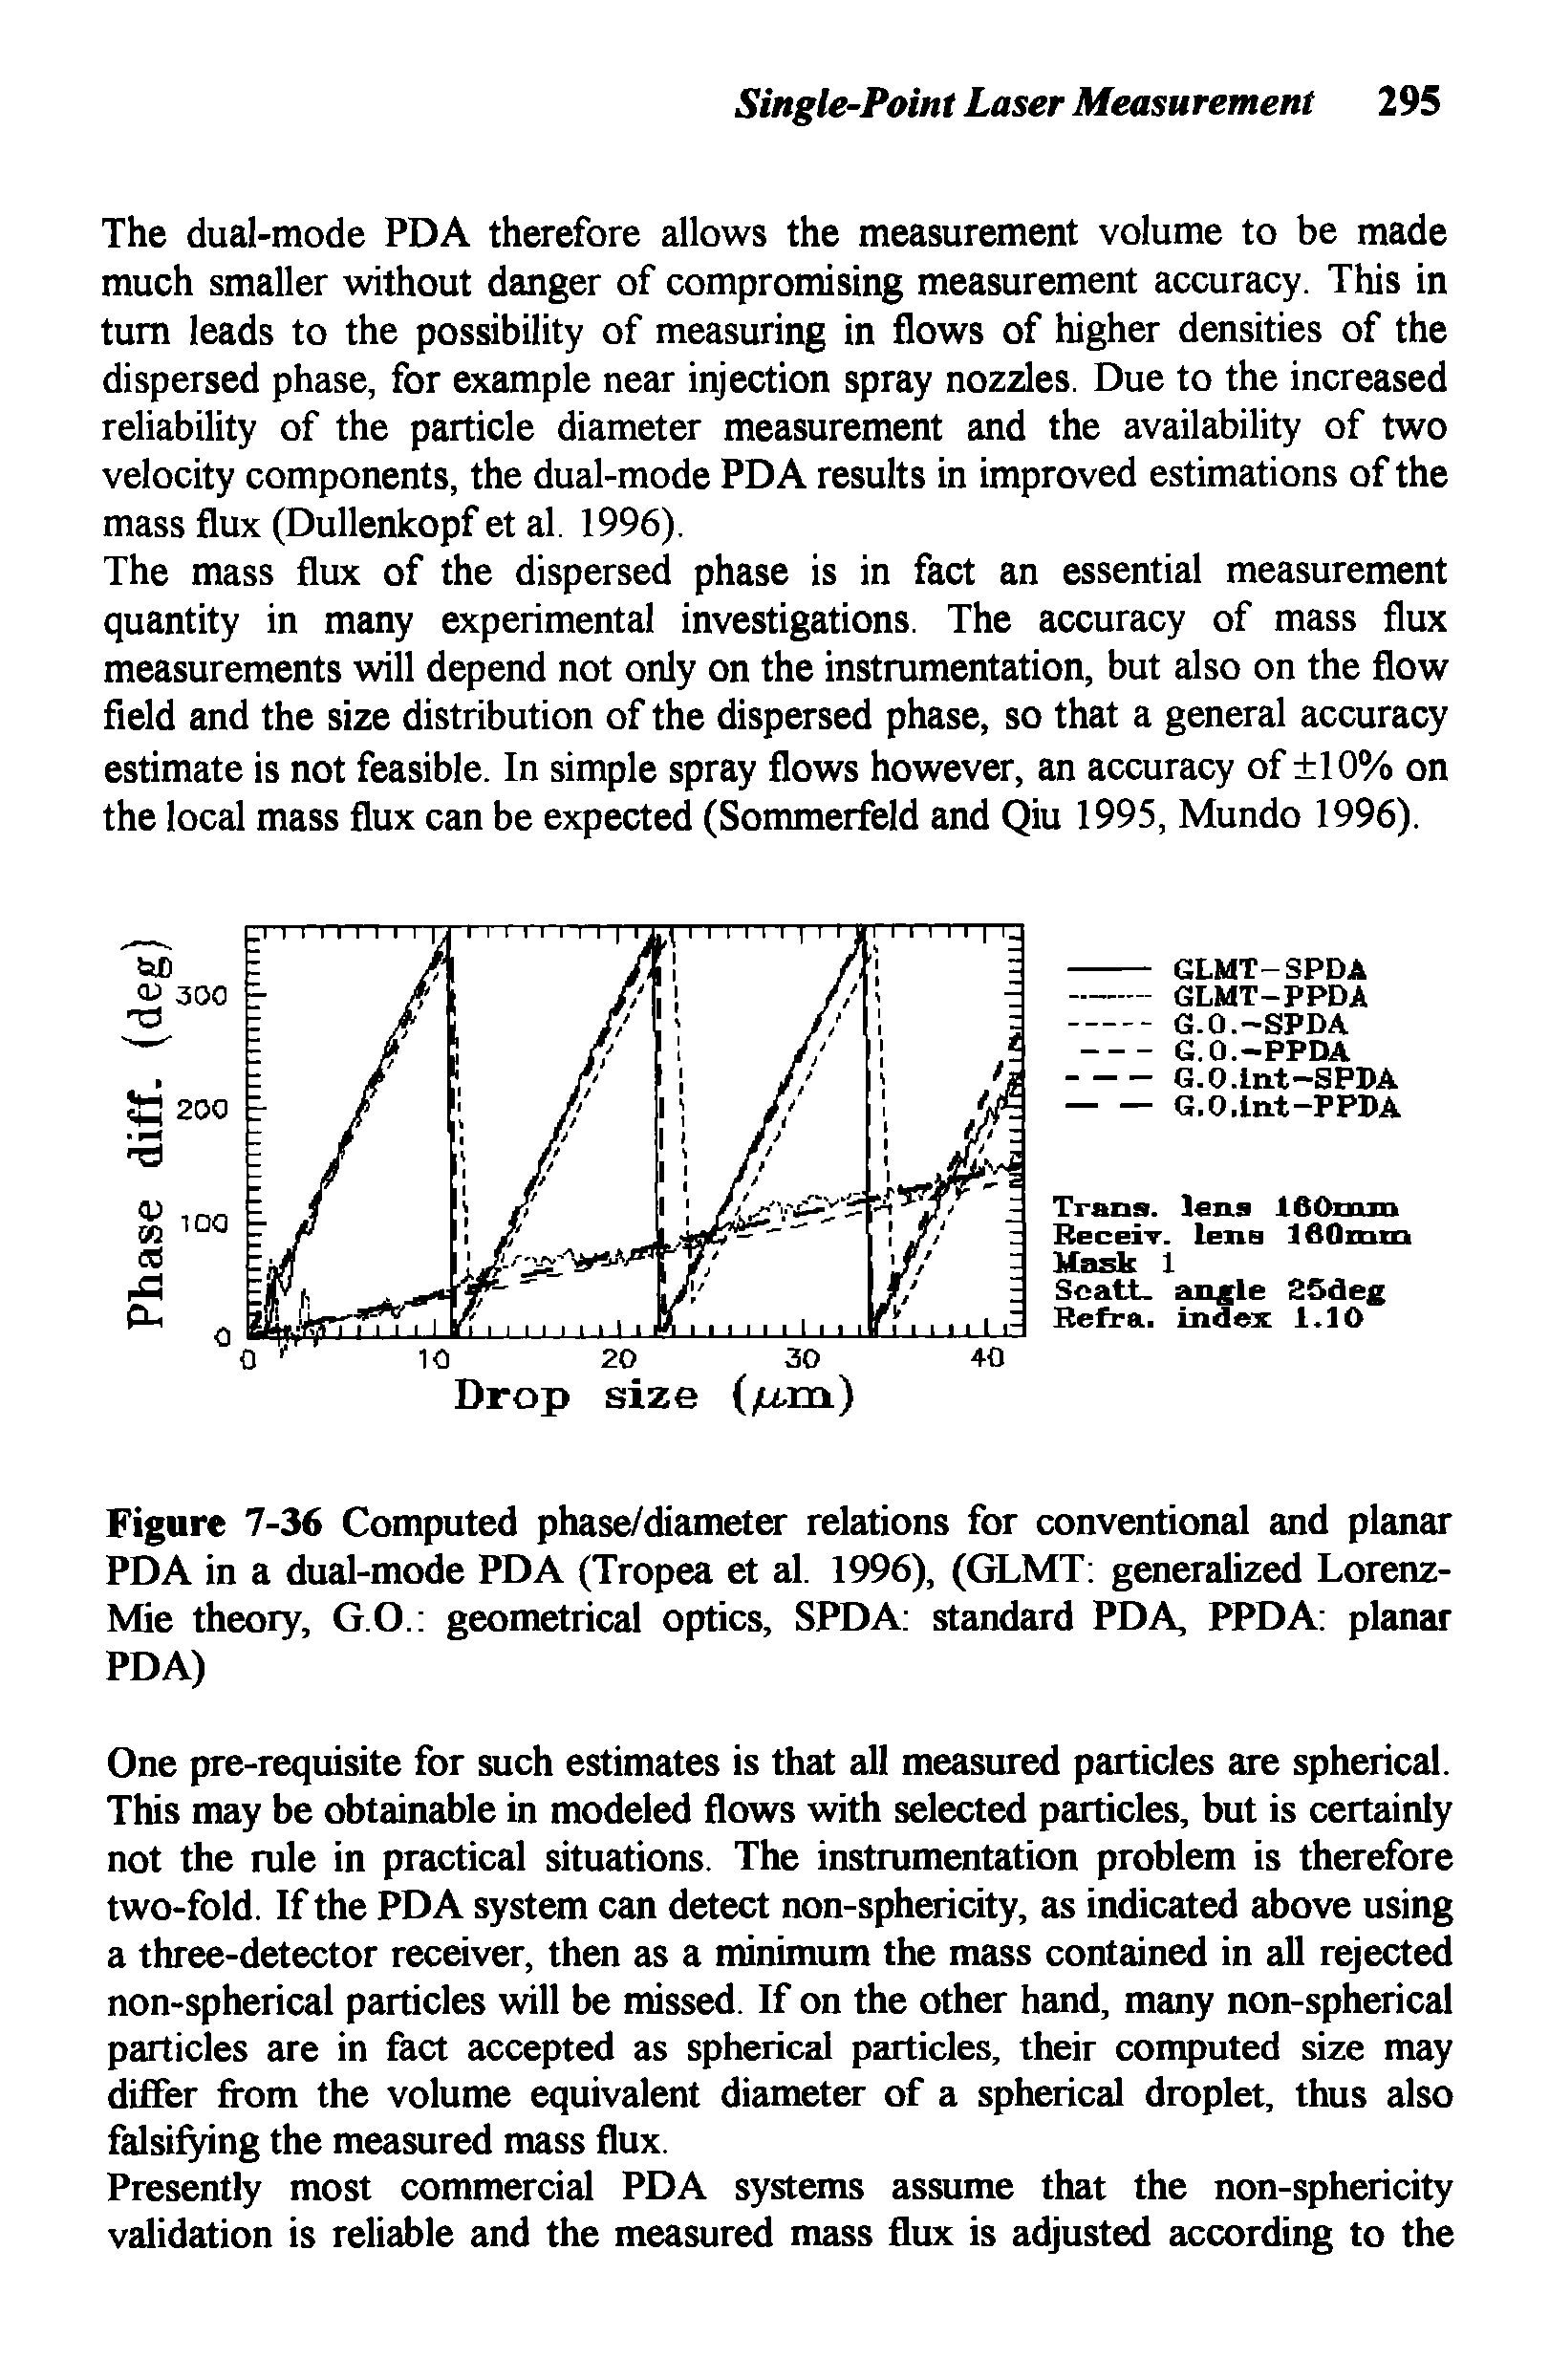 Figure 7-36 Computed phase/diameter relations for conventional and planar PDA in a dual-mode PDA (Tropea et al. 1996), (GLMT generalized Lorenz-Mie theory, GO. geometrical optics, SPDA standard PDA, PPDA planar PDA)...